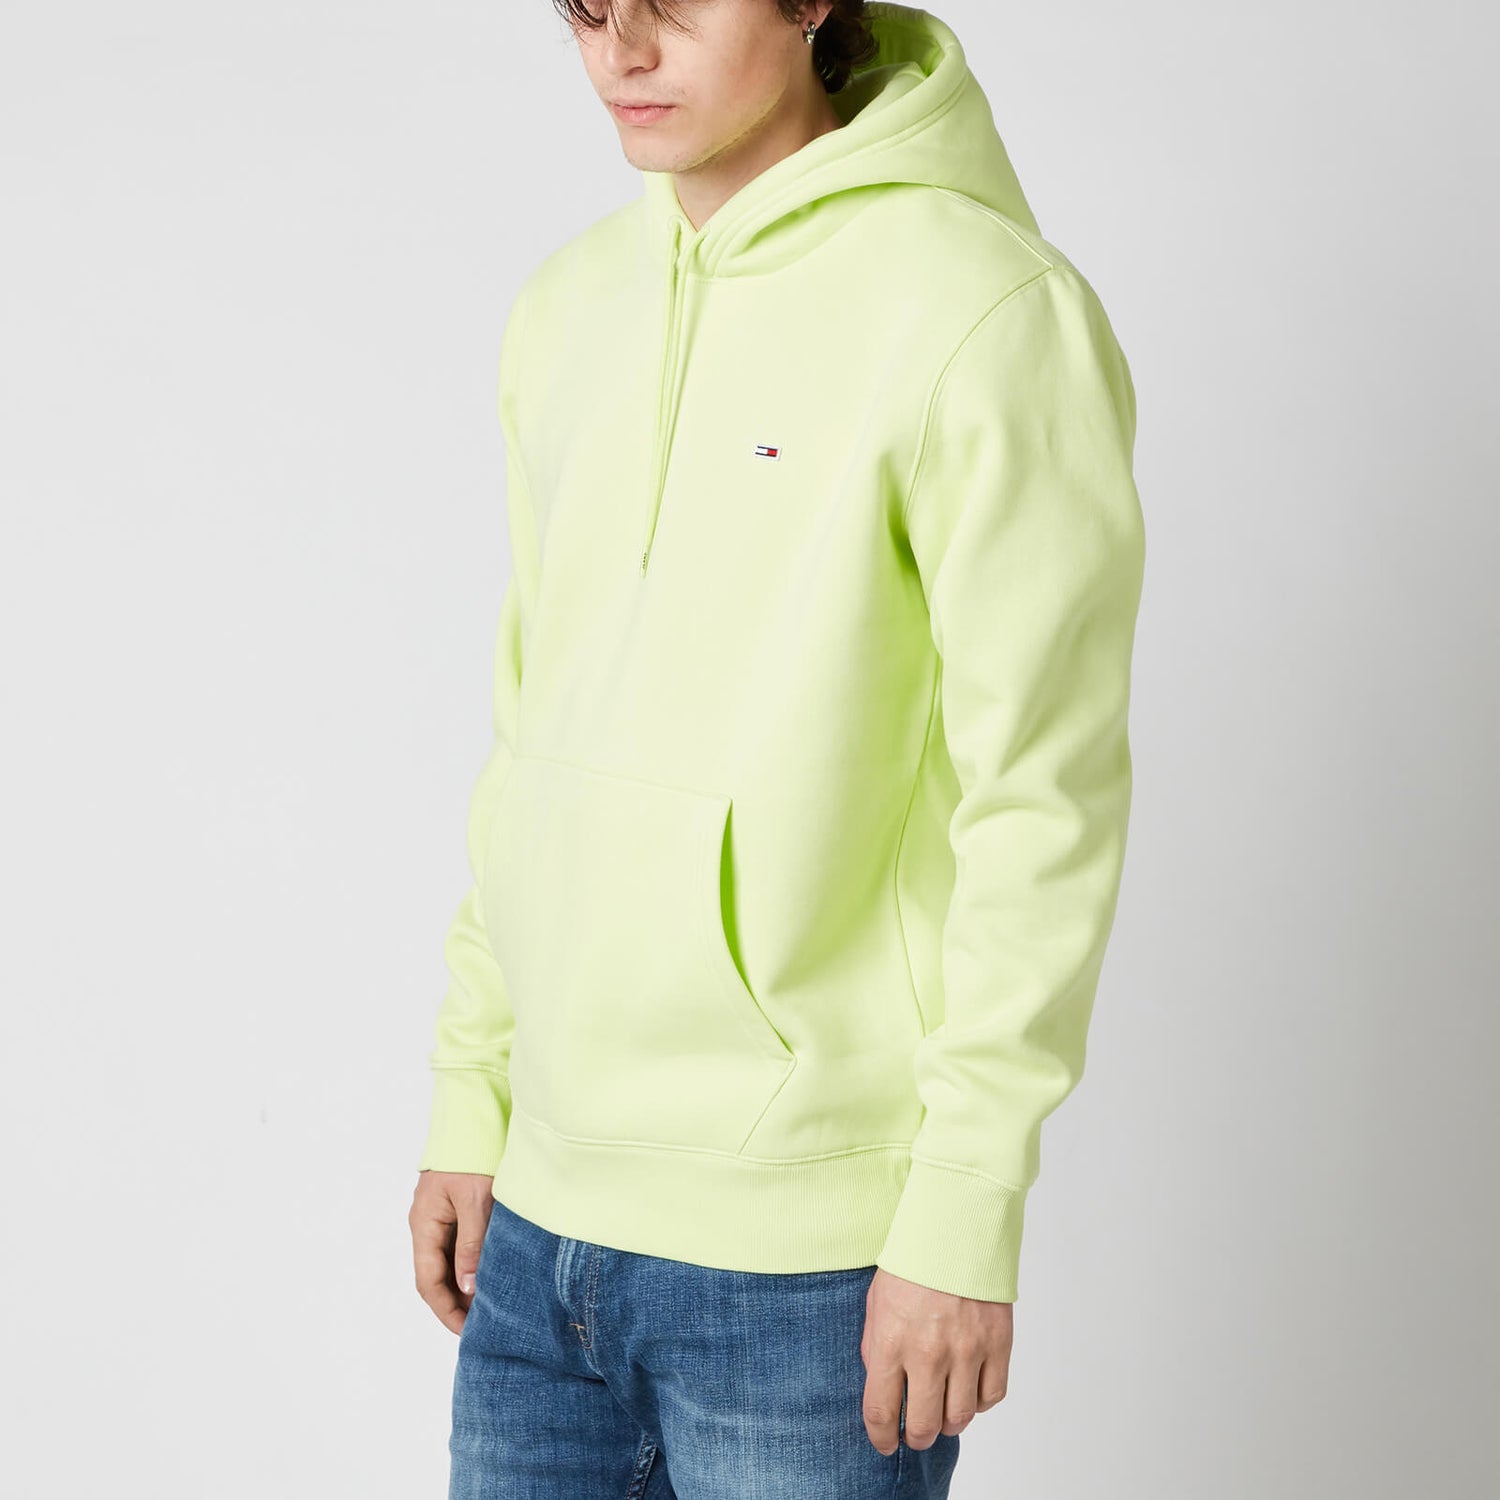 Tommy Jeans Men's Regular Fit Fleece Pullover Hoodie - Faded Lime